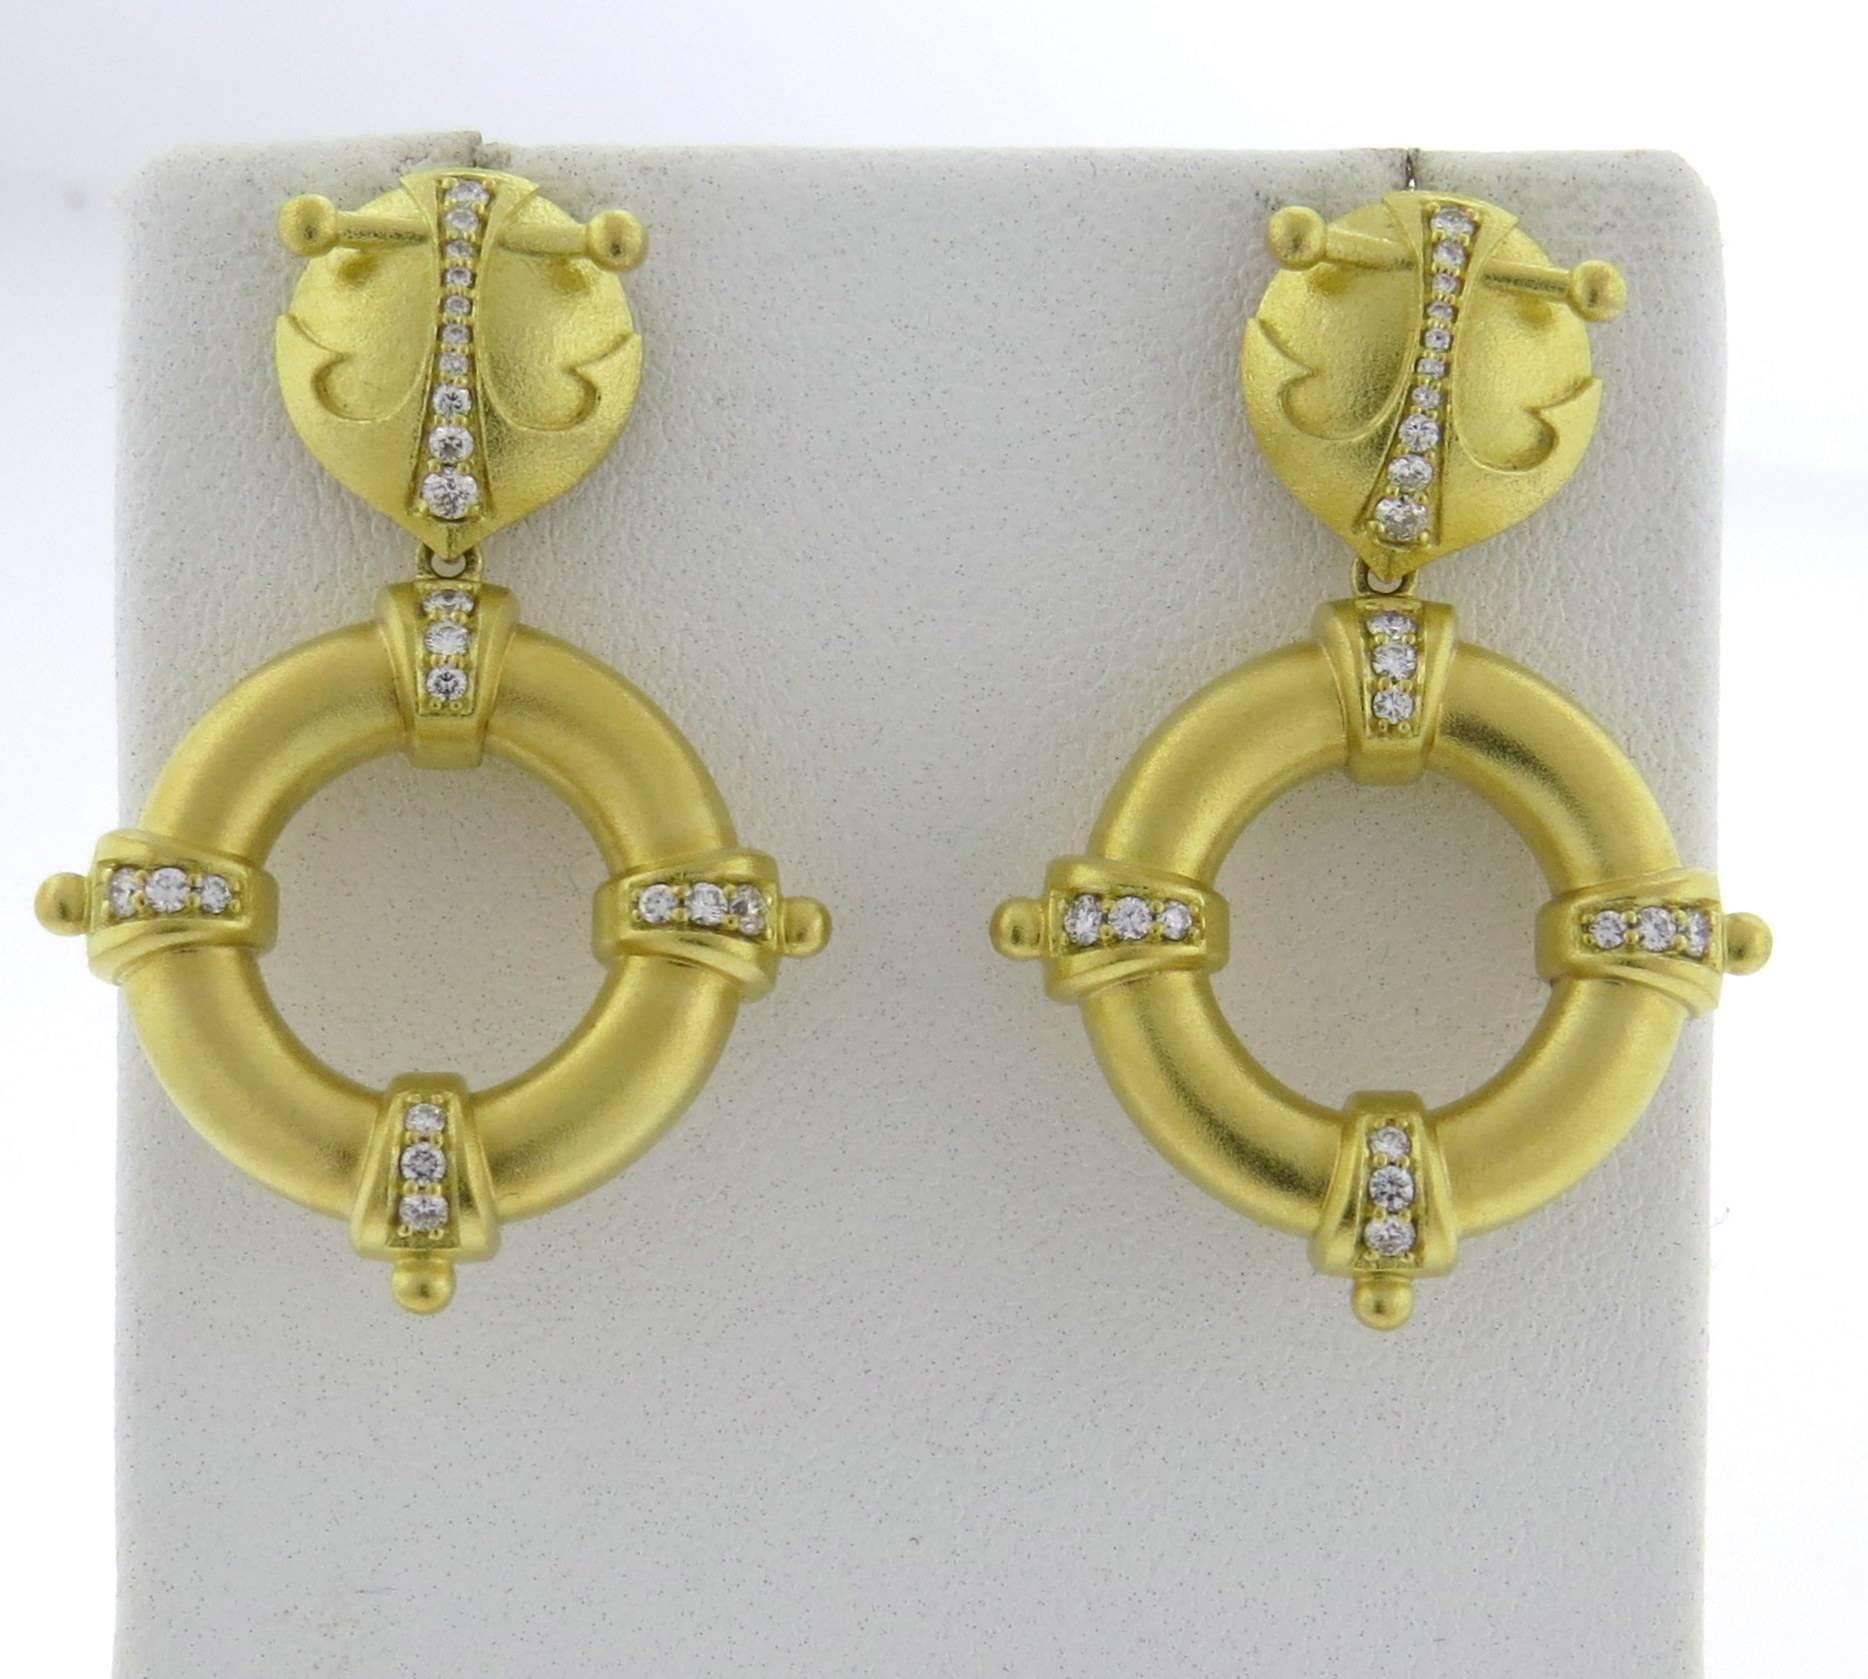 A pair of 18k yellow gold drop earrings, crafted by Paul Morelli, featuring approx. 0.70ctw in diamonds. Earrings: 28.6mm X 41.3mm. Marked: Morelli, 750. Weight - 22.3 grams
Retail $6200